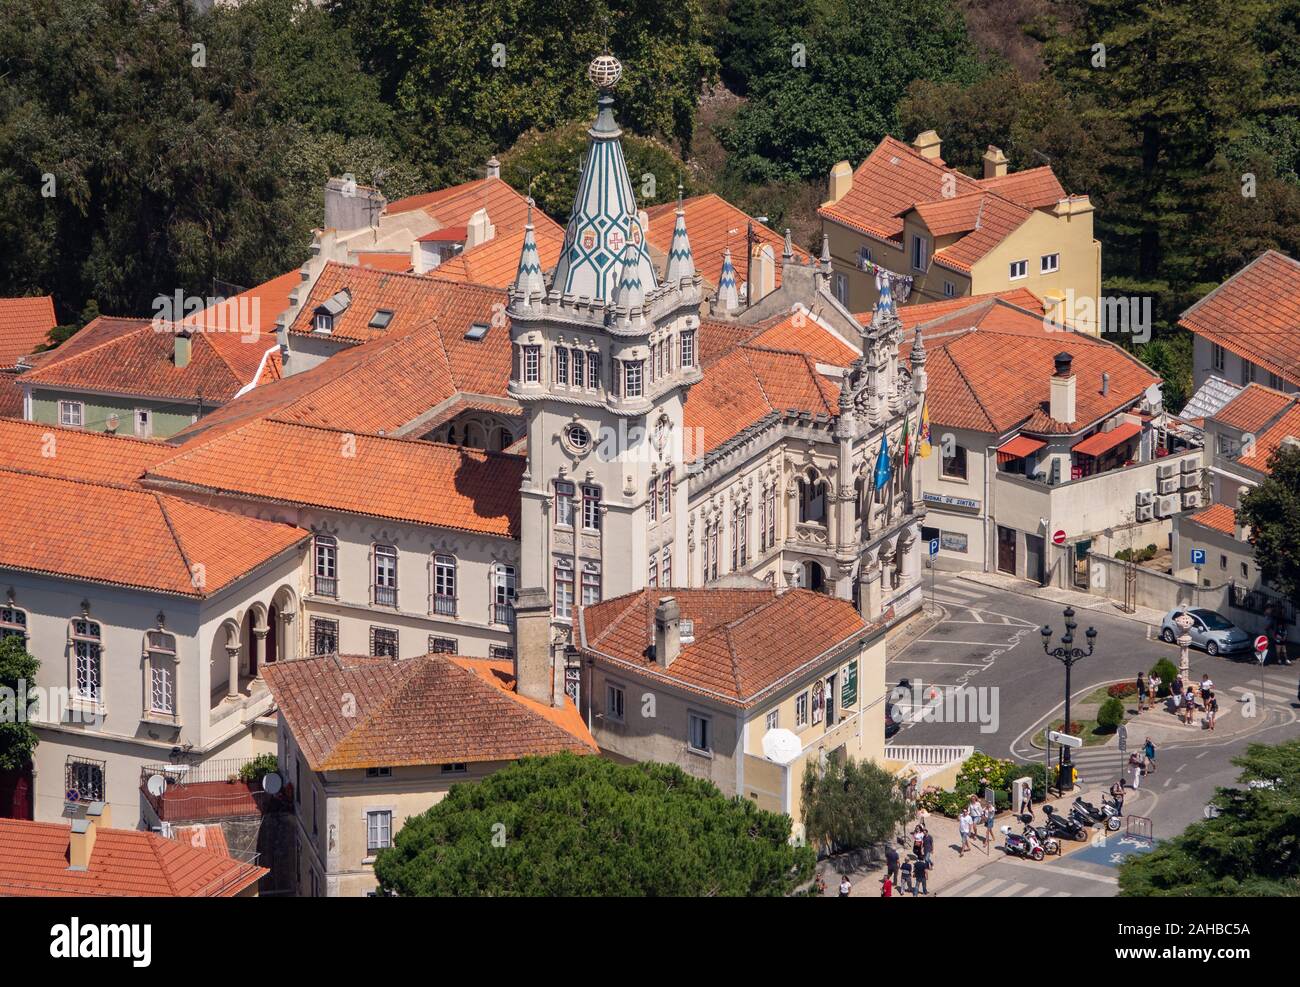 Sintra, Portugal - 21 August 2019: Aerial view of the city of Sintra and the Town Hall from the walls of Moorish castle Stock Photo